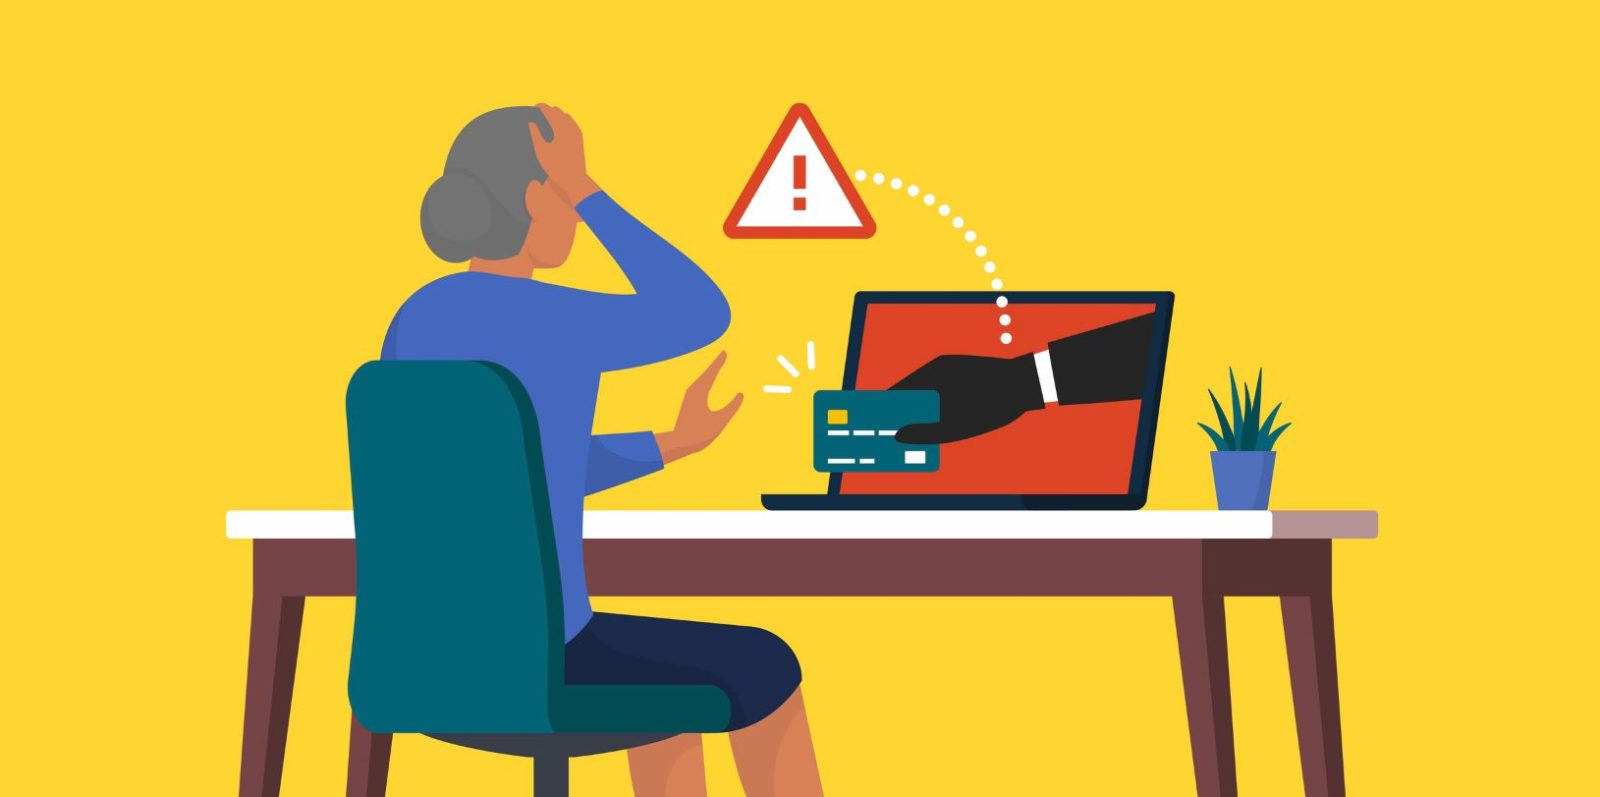 graphic showing person at desk with a laptop and a hand reaching out of the laptop to pick up a credit card